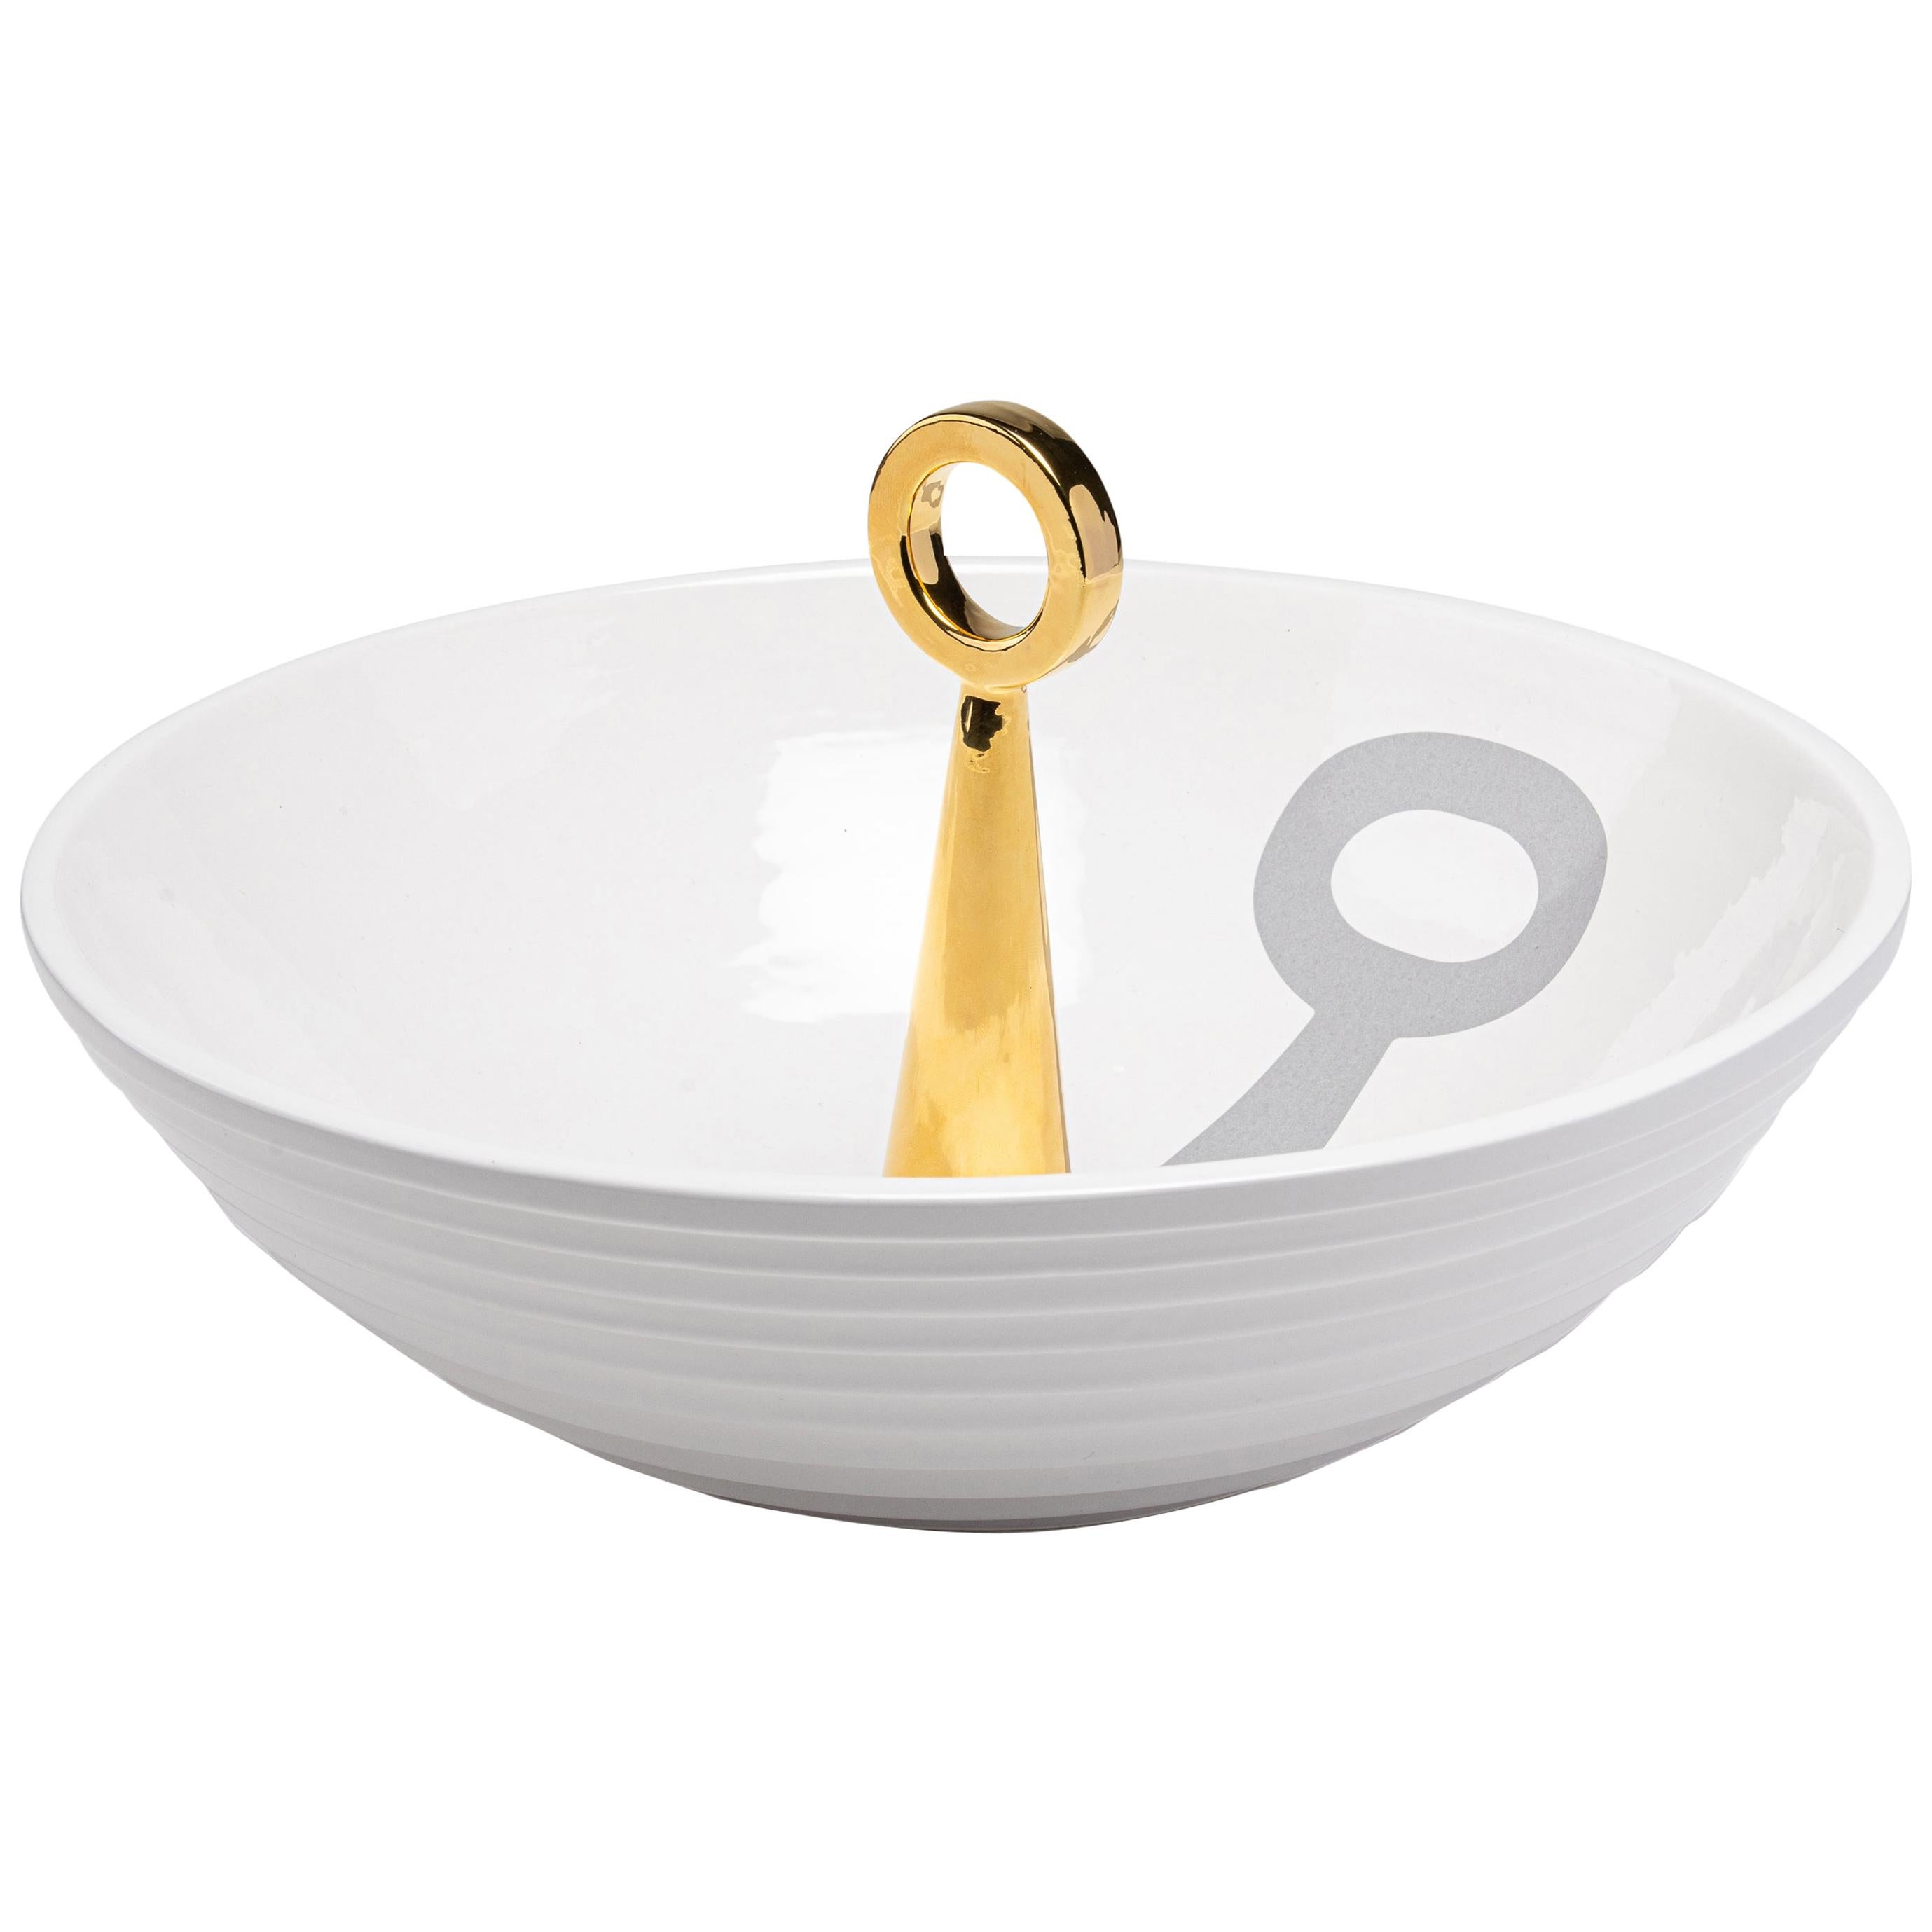 12:30 _ White Ceramic and 24-K Gold Details Handcrafted Bowl For Sale